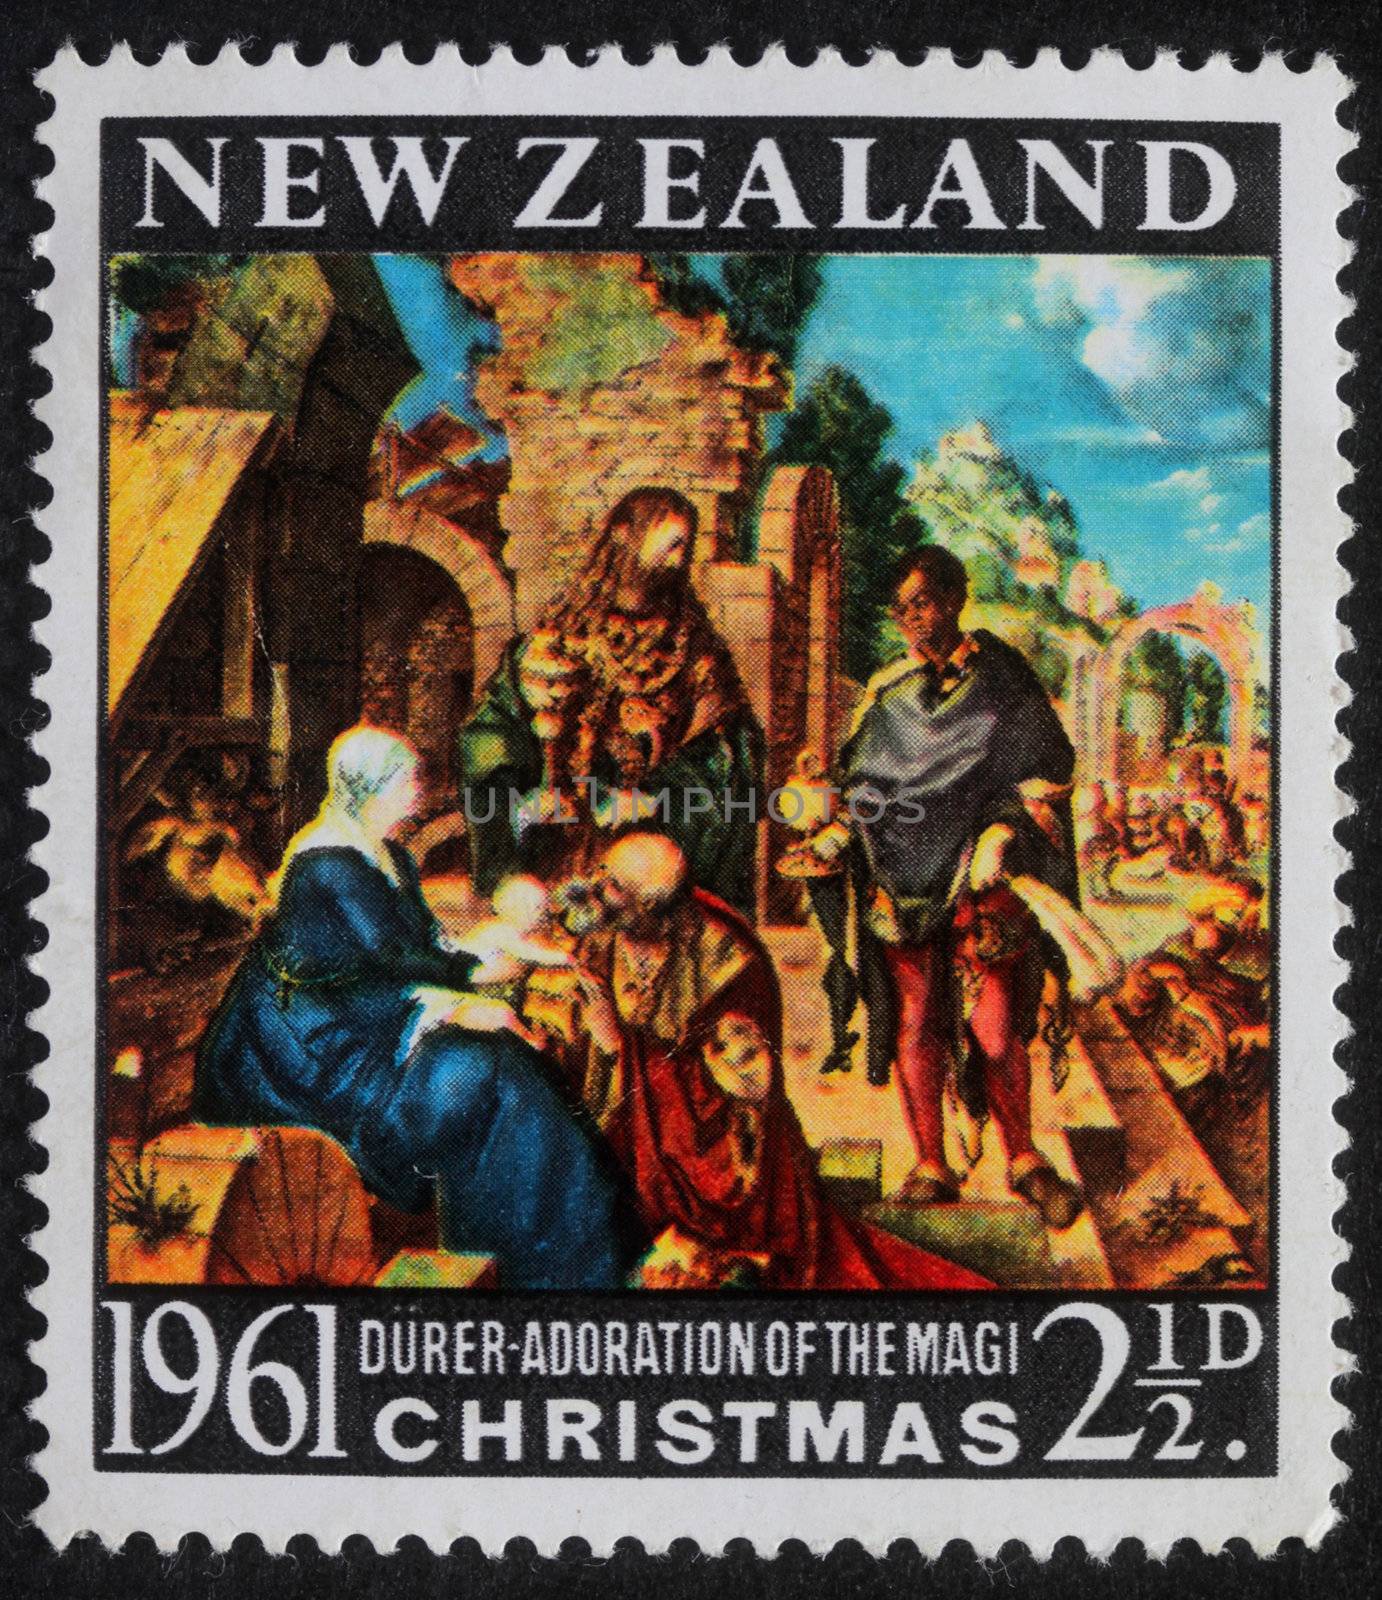 NEW ZEALAND - CIRCA 1961: A greeting Christmas stamp printed in New Zealand shows birth of Jesus Christ, adoration of the Magi